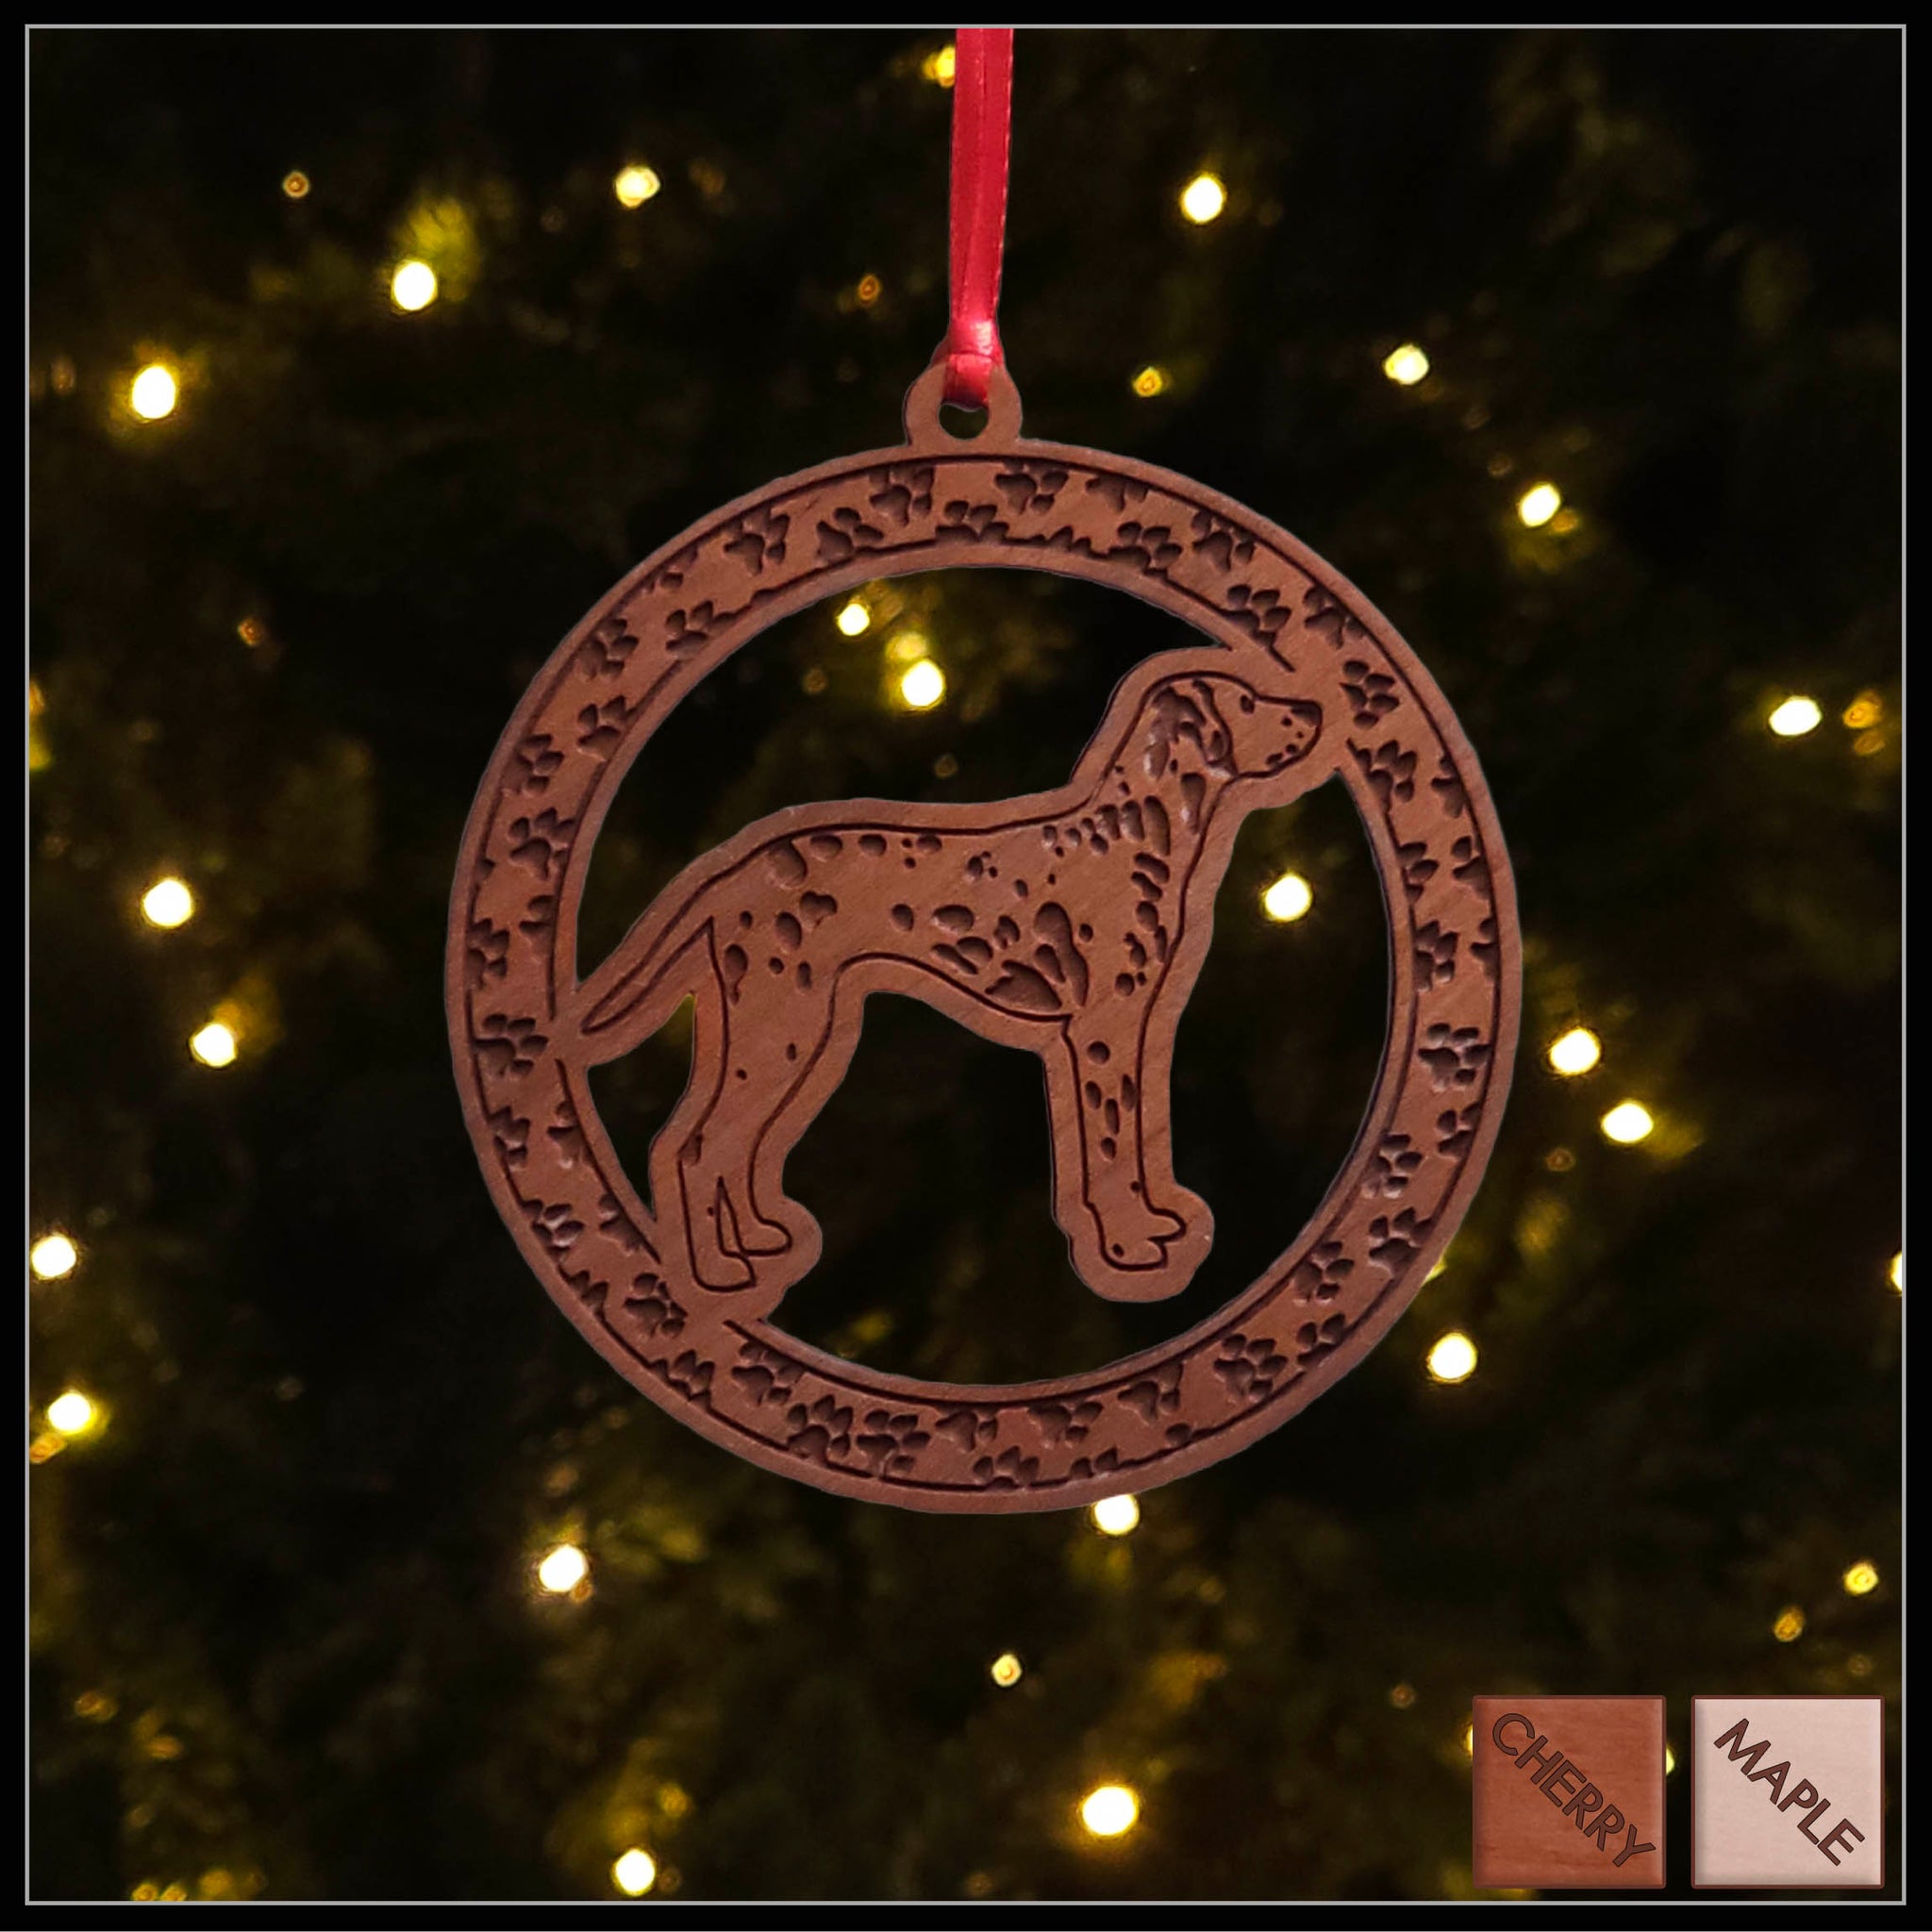 A round cherry wood veneer ornament with a border of small paw prints. The center of the ornament is a Dalmation.